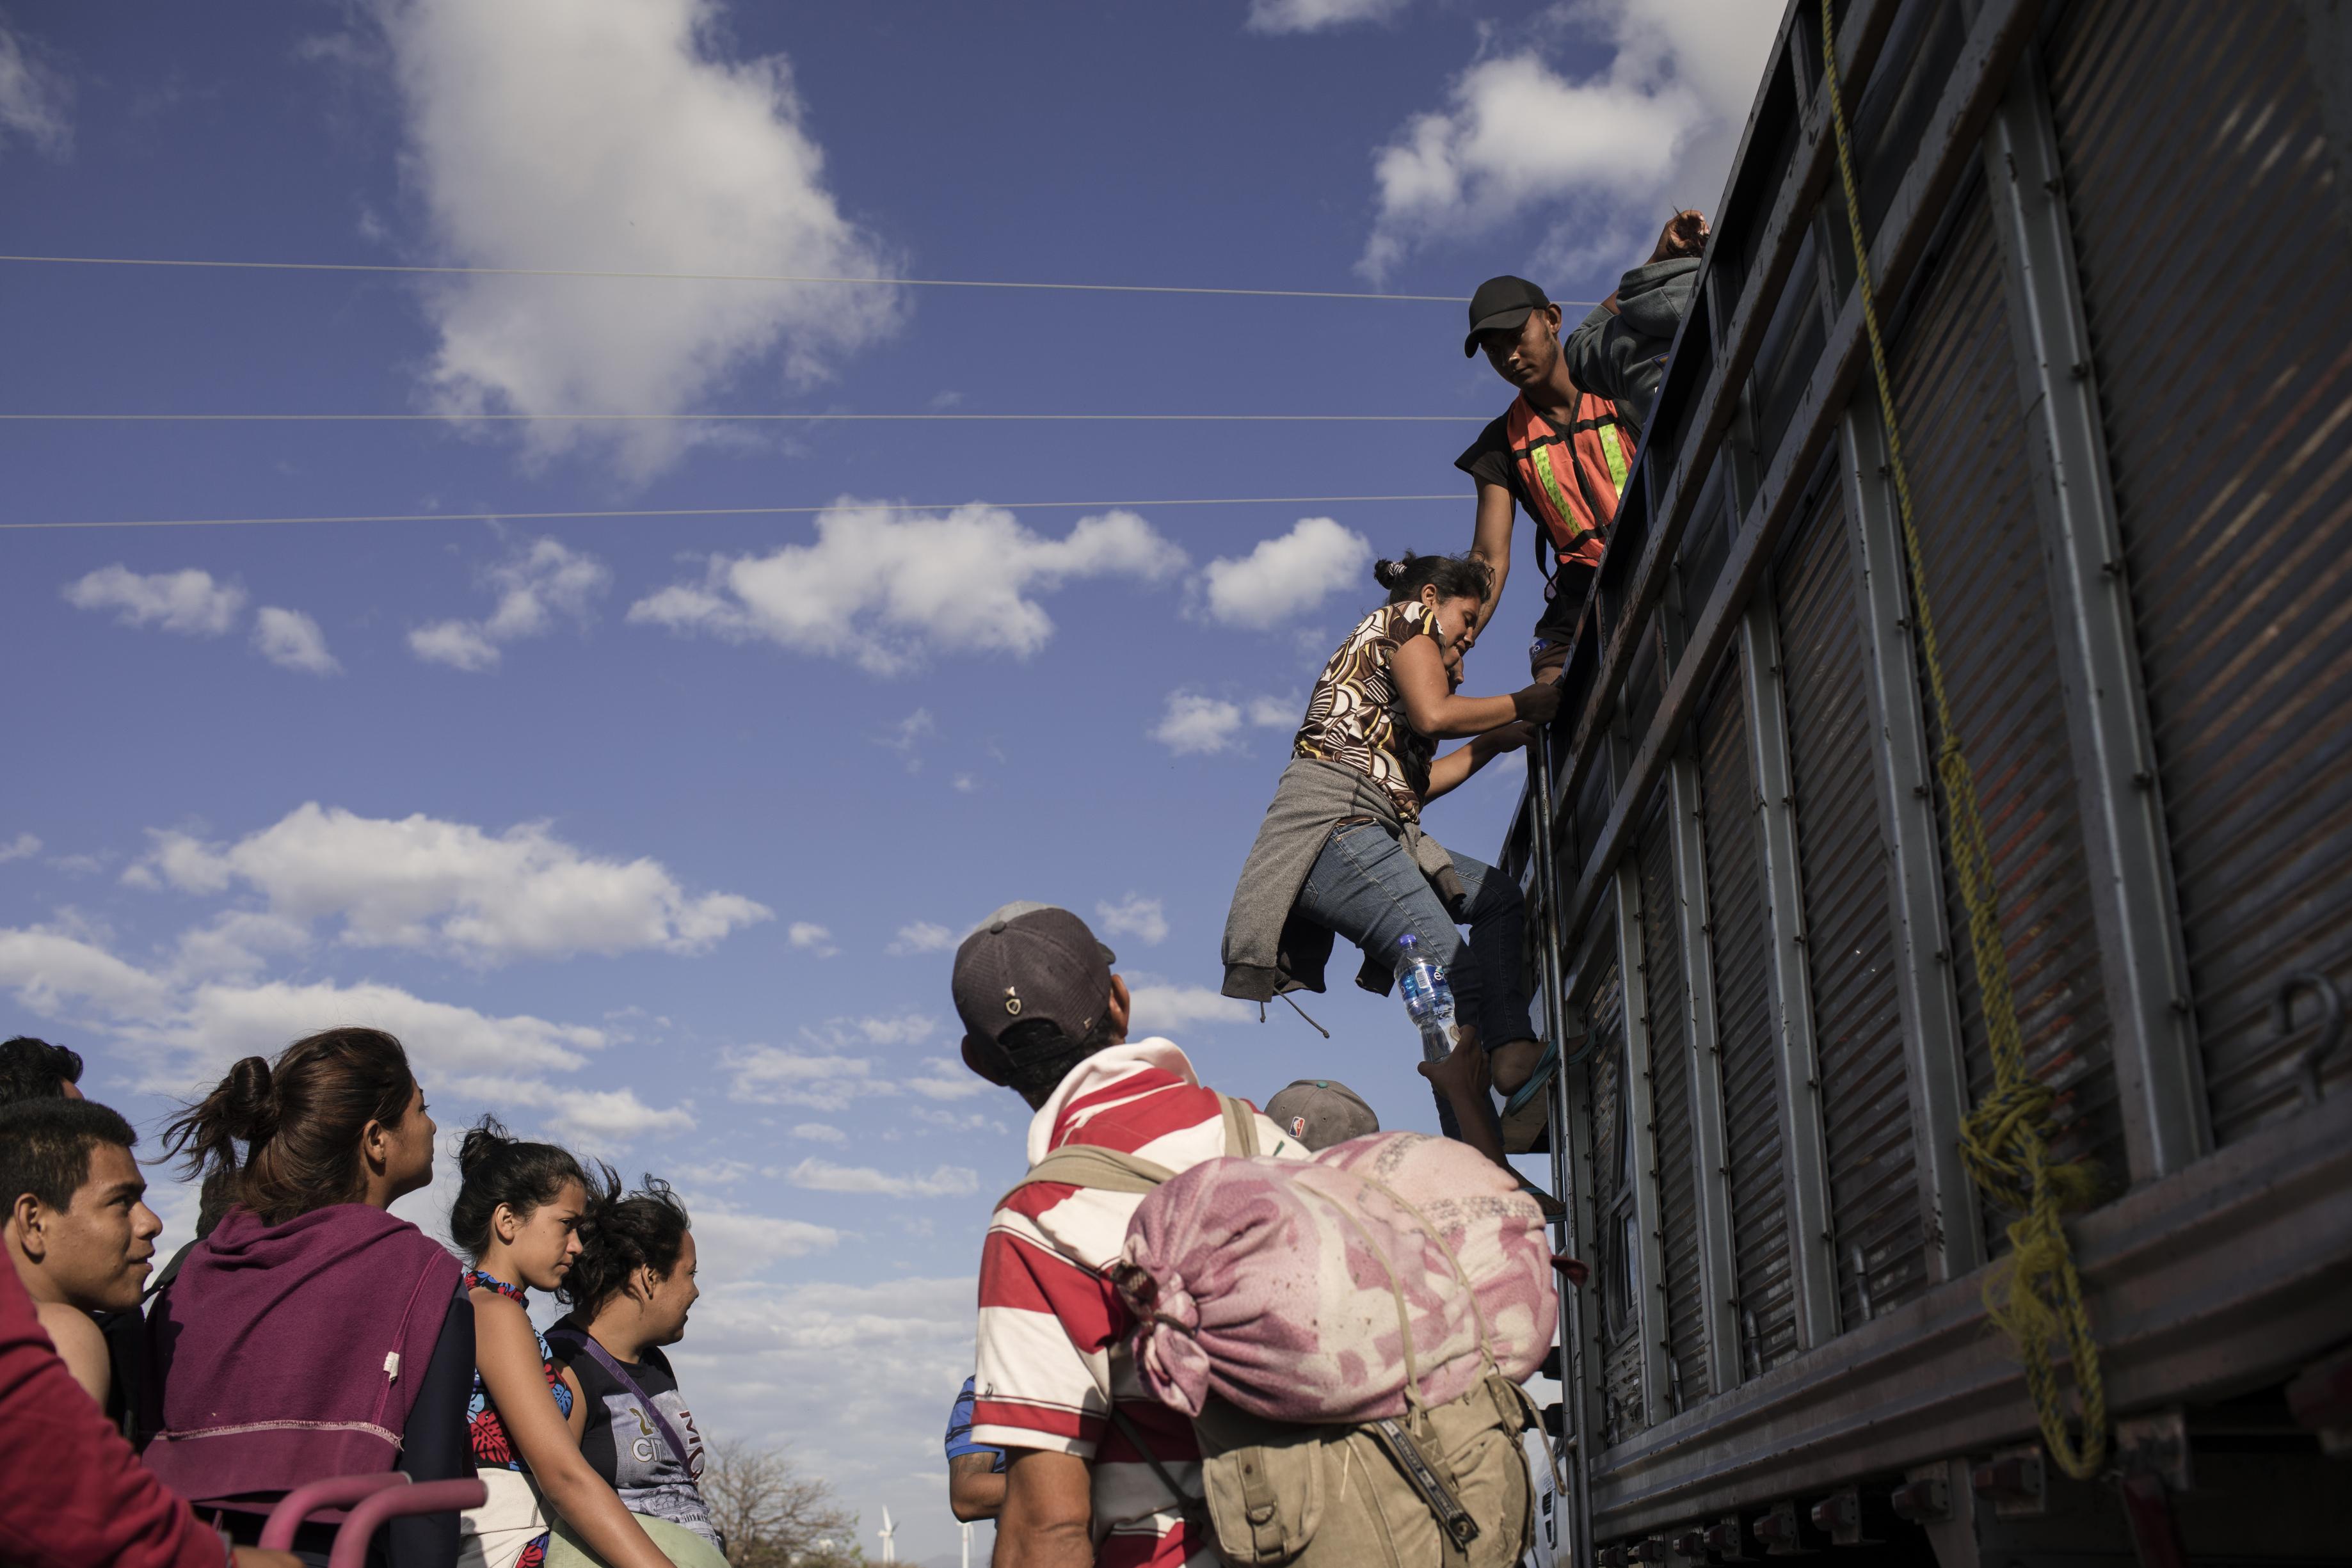 A group of Central American refugees and asylum seekers, led by the non-profit humanitarian organization Pueblos Sin Fronteras (People Without Borders), board a truck offering a ride to their next destination in the town of Santiago Niltepec, Oaxaca state, Mexico, on Saturday, March 31, 2018. The Trump administration is crafting legislation to make it harder for refugees to gain asylum in the U.S. and loosen restrictions on detaining immigrants apprehended near the border, a senior White House official said. Photographer: Jordi Ruiz Cirera/Bloomberg